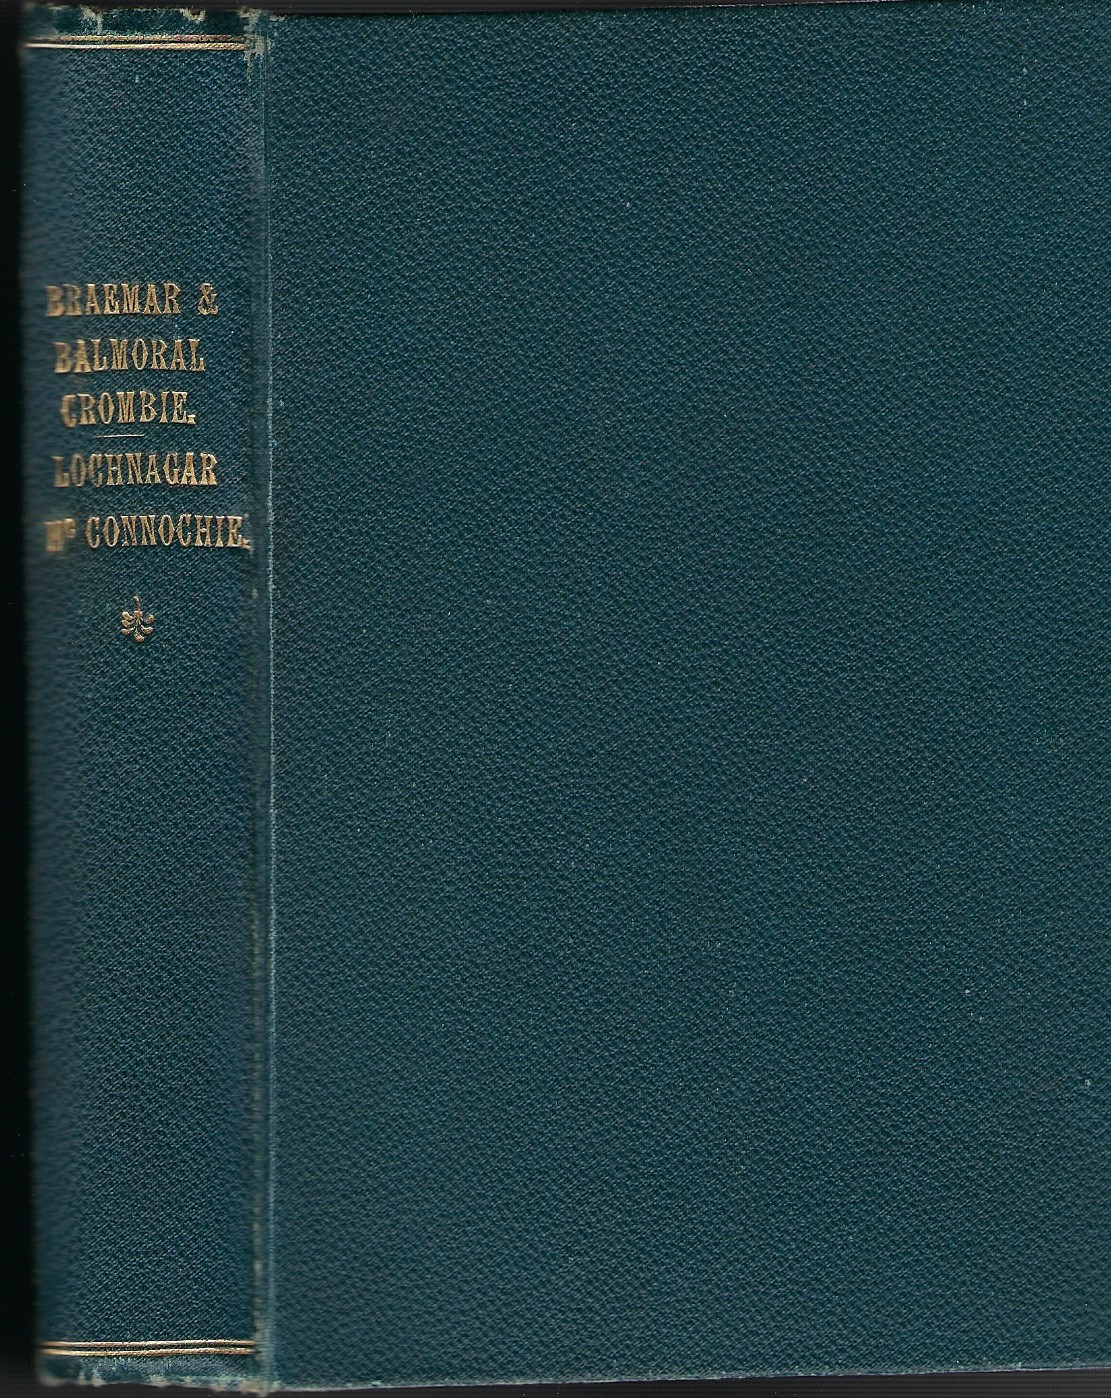 Image for Braemar & Balmoral: A Guide to the Deeside Highlands by J. Crombie & Lochnagar by A.I. McConnochie.